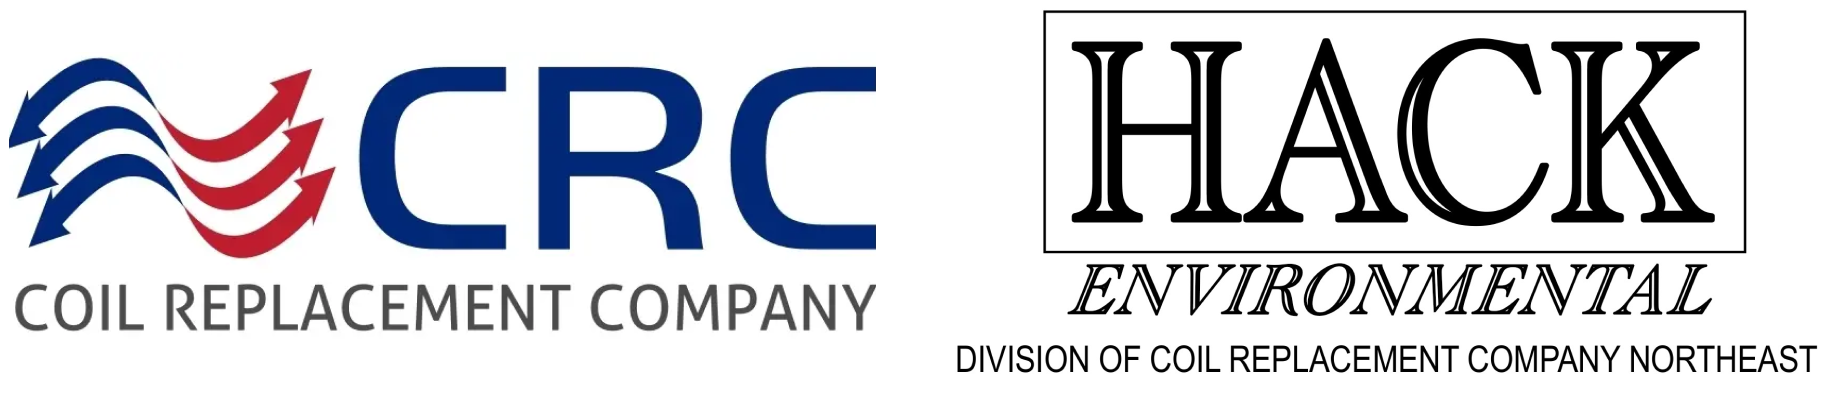 Coil Replacement Company logo